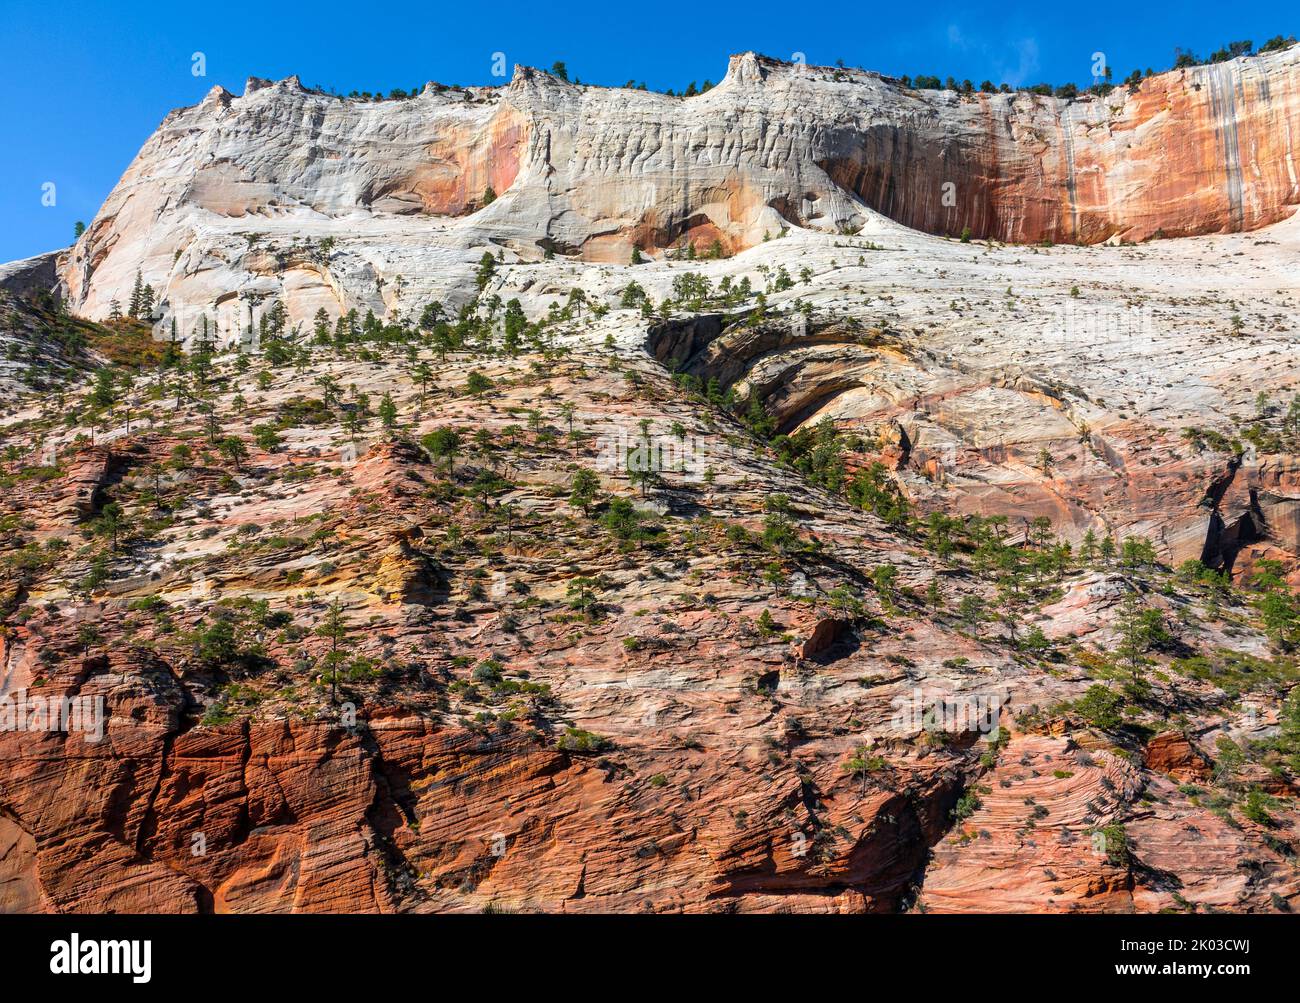 Zion National Park is located in southwestern Utah on the border with Arizona. It has an area of 579 kö² and lies between 1128 m and 2660 m altitude. Rock landscape, view from Angels Landing Trail over the Fridge Canyon. Stock Photo